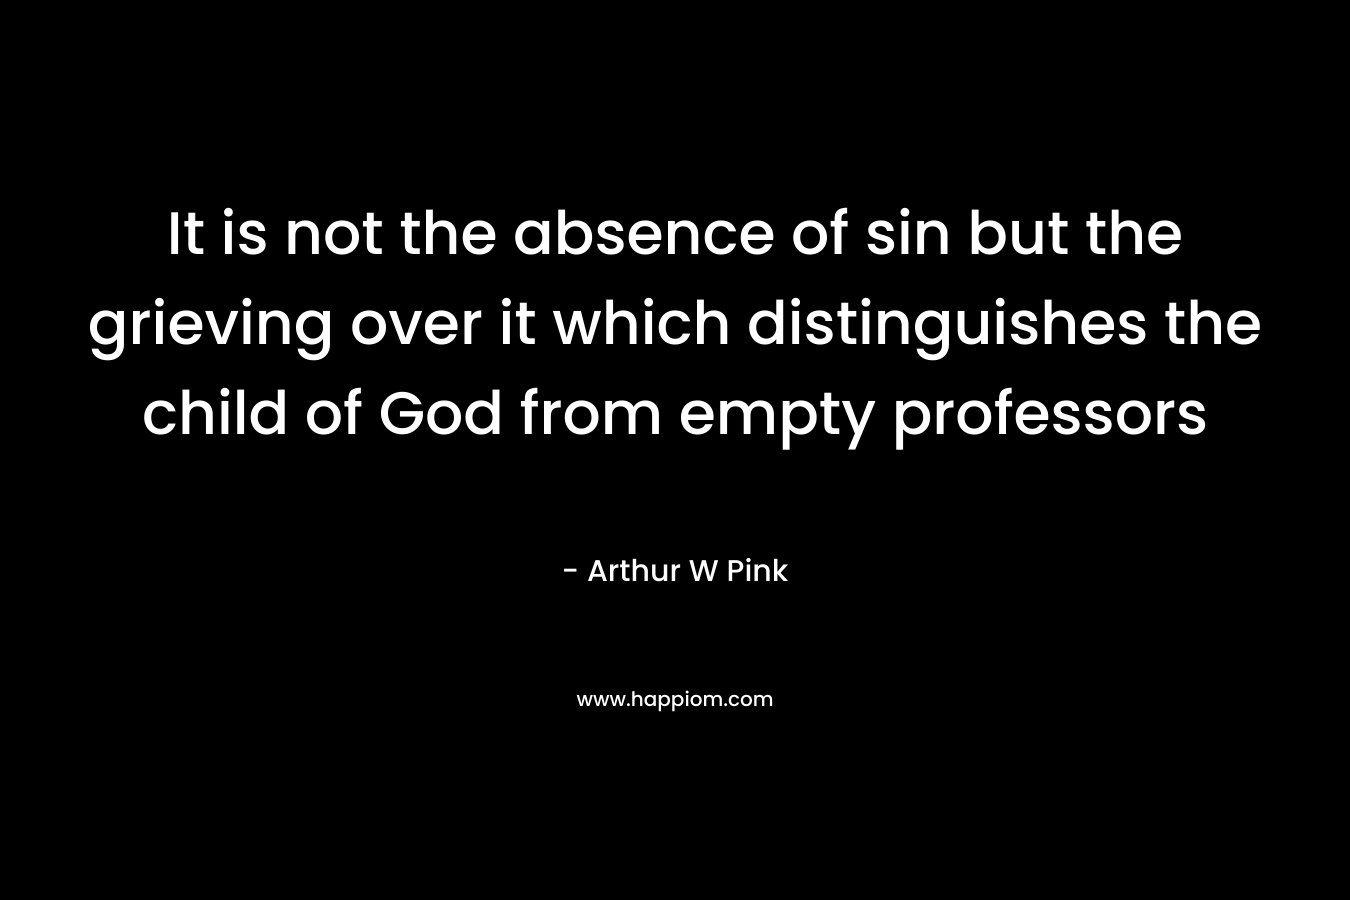 It is not the absence of sin but the grieving over it which distinguishes the child of God from empty professors – Arthur W Pink